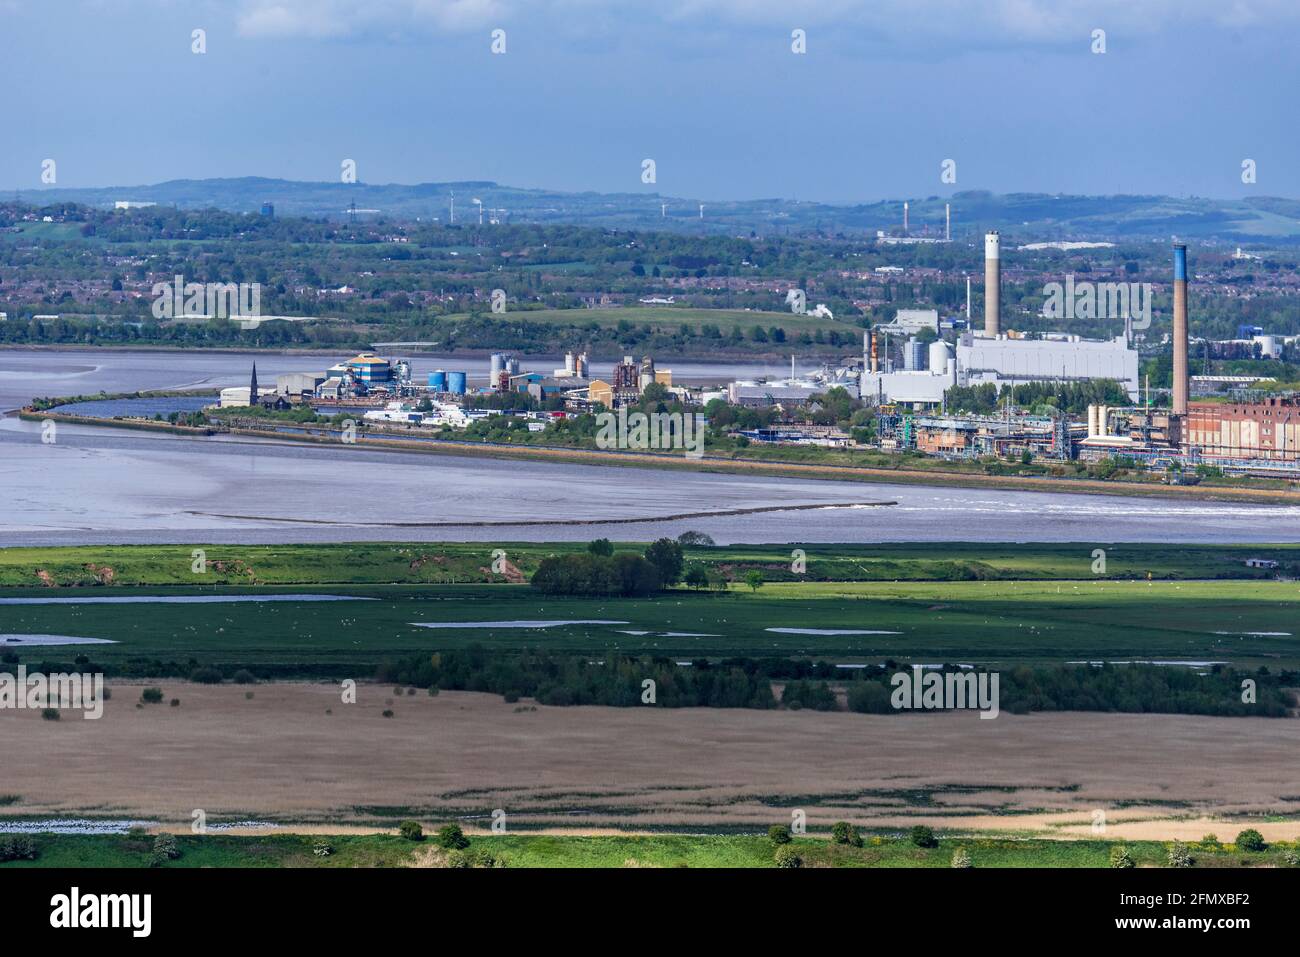 Weston Point factories and power station (rt) on the river Mersey beside the Manchester ship canal. The grey building is Runcorn EfW Facility. Stock Photo